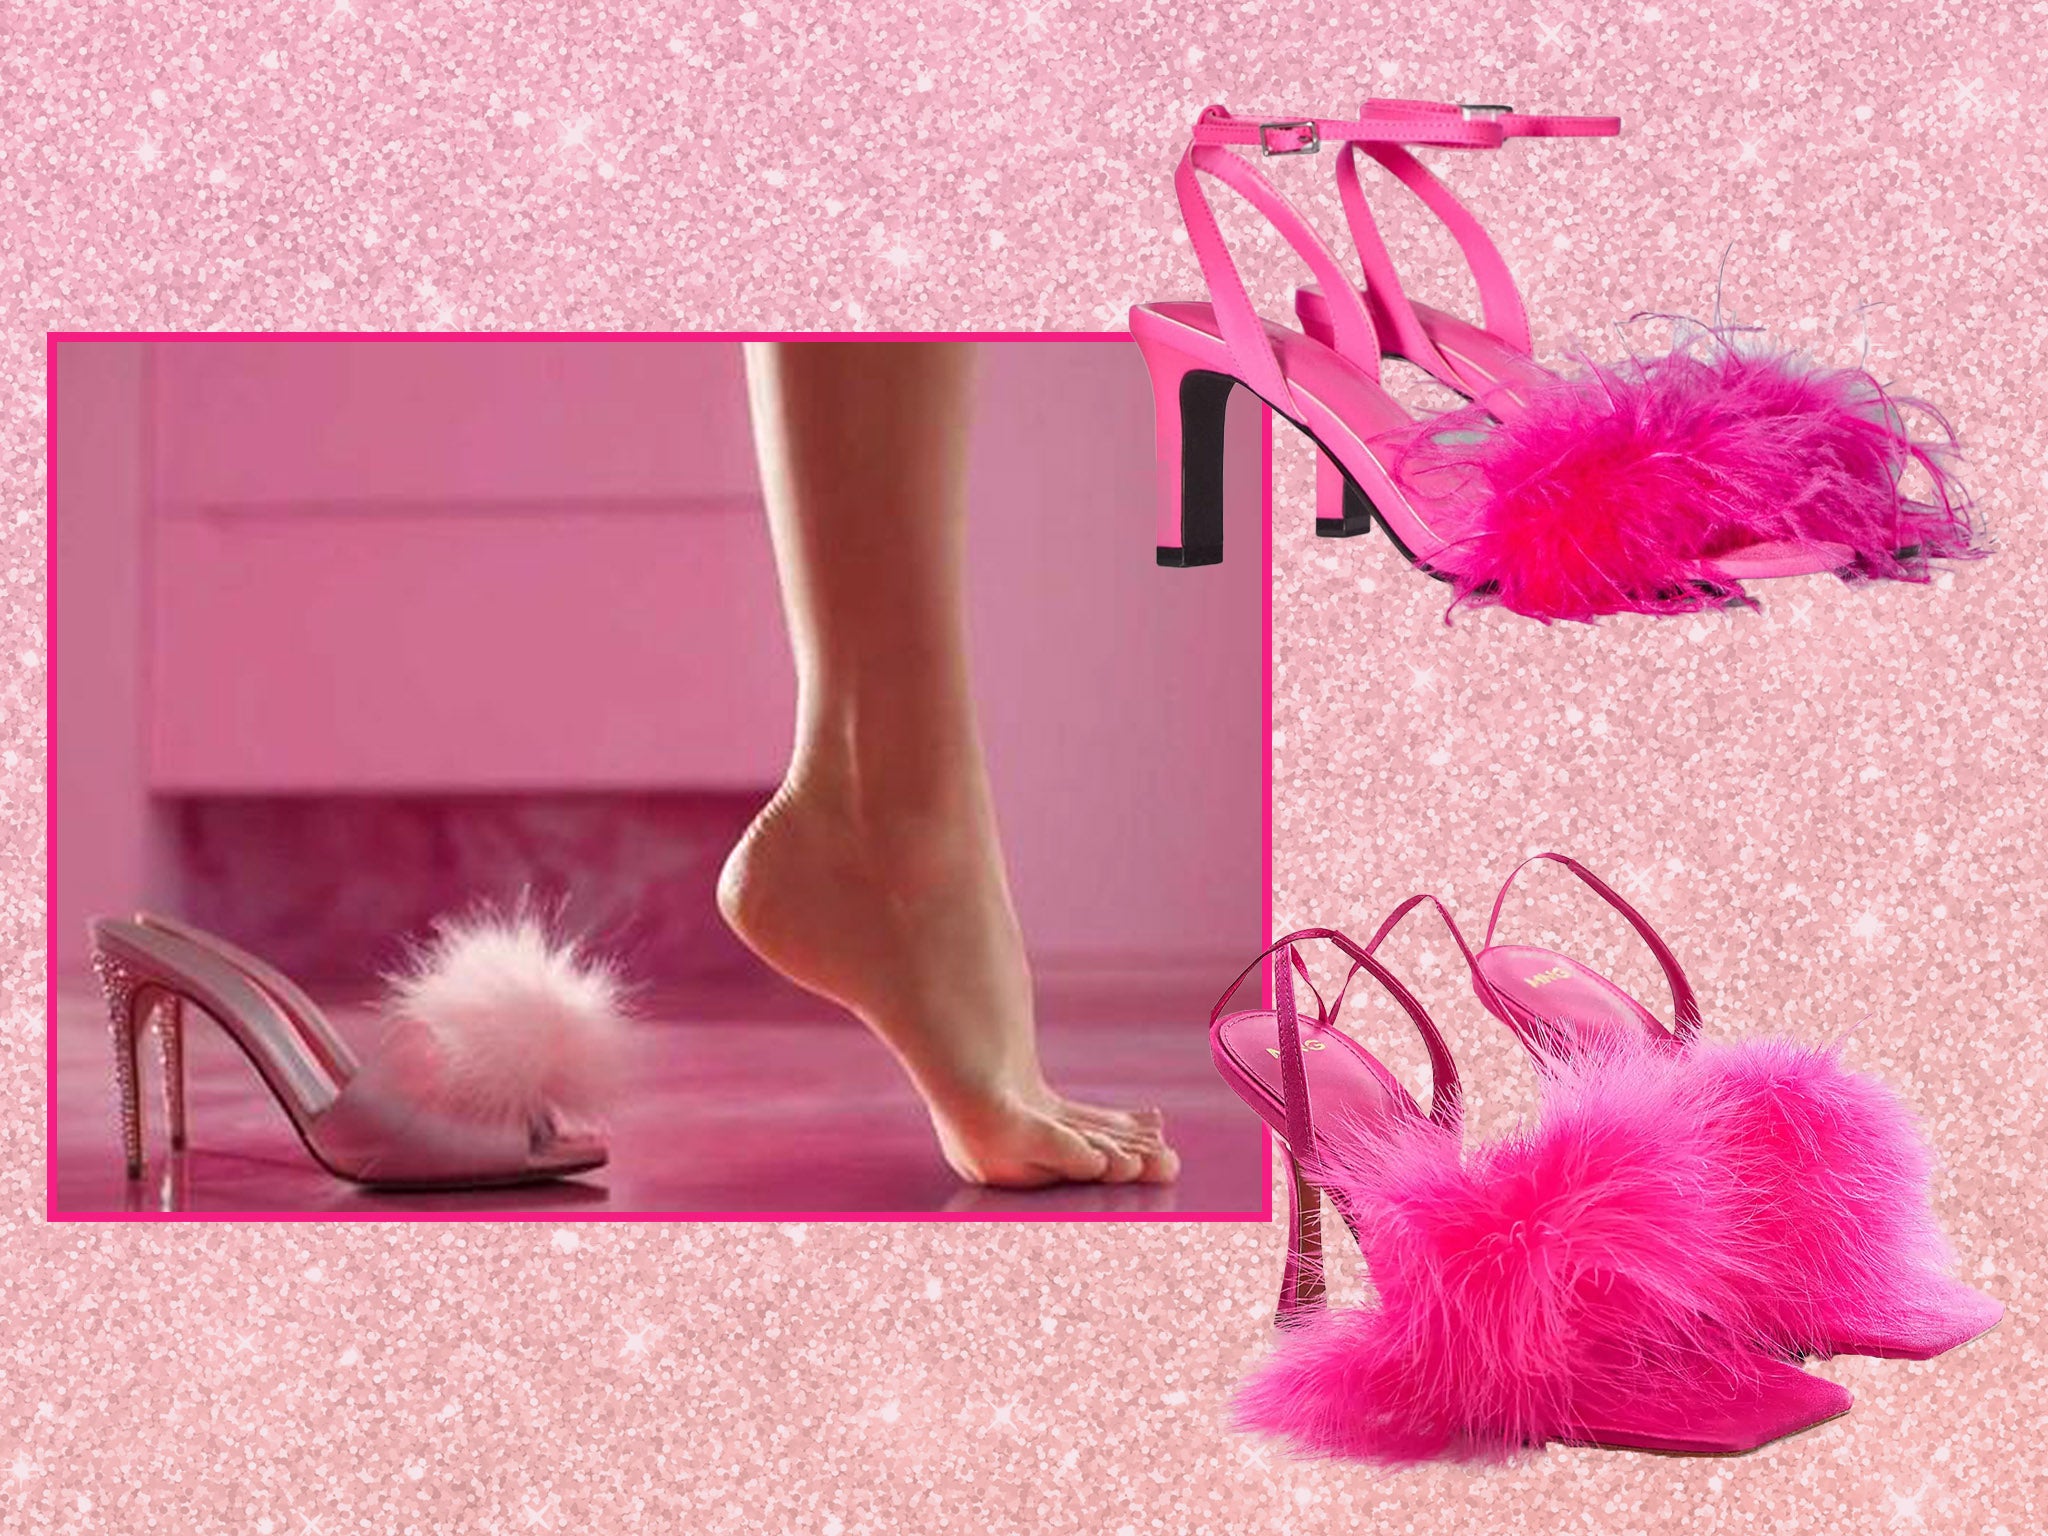 Barbie Movie Get The Look With These High Street Pink Heels The Independent